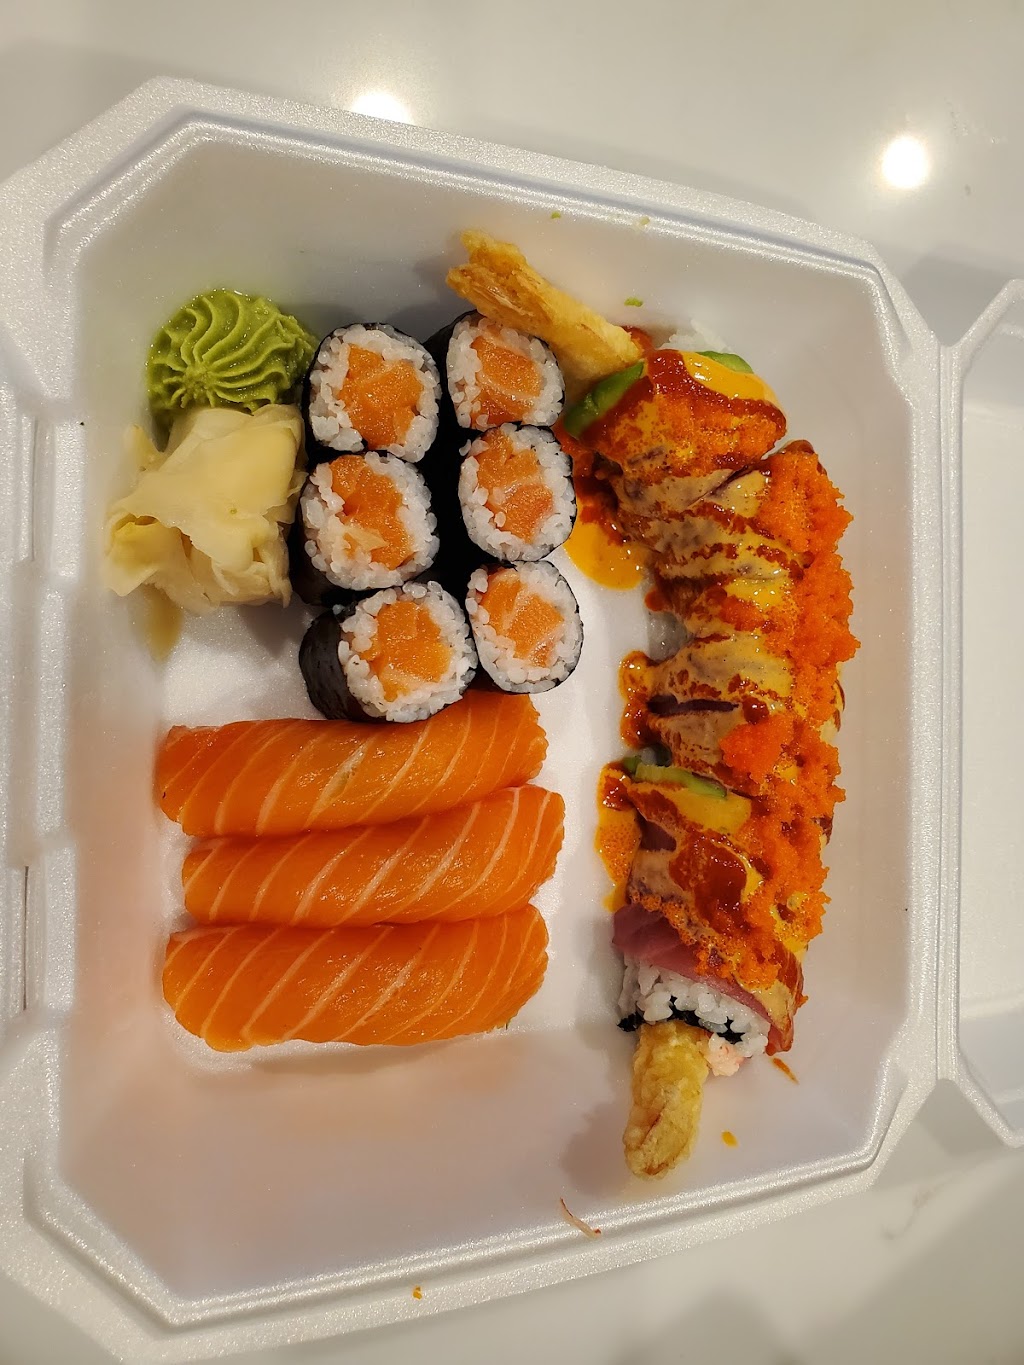 Wow Sushi | 3630 Rochester Rd, Troy, MI 48083, USA | Phone: (248) 526-0425